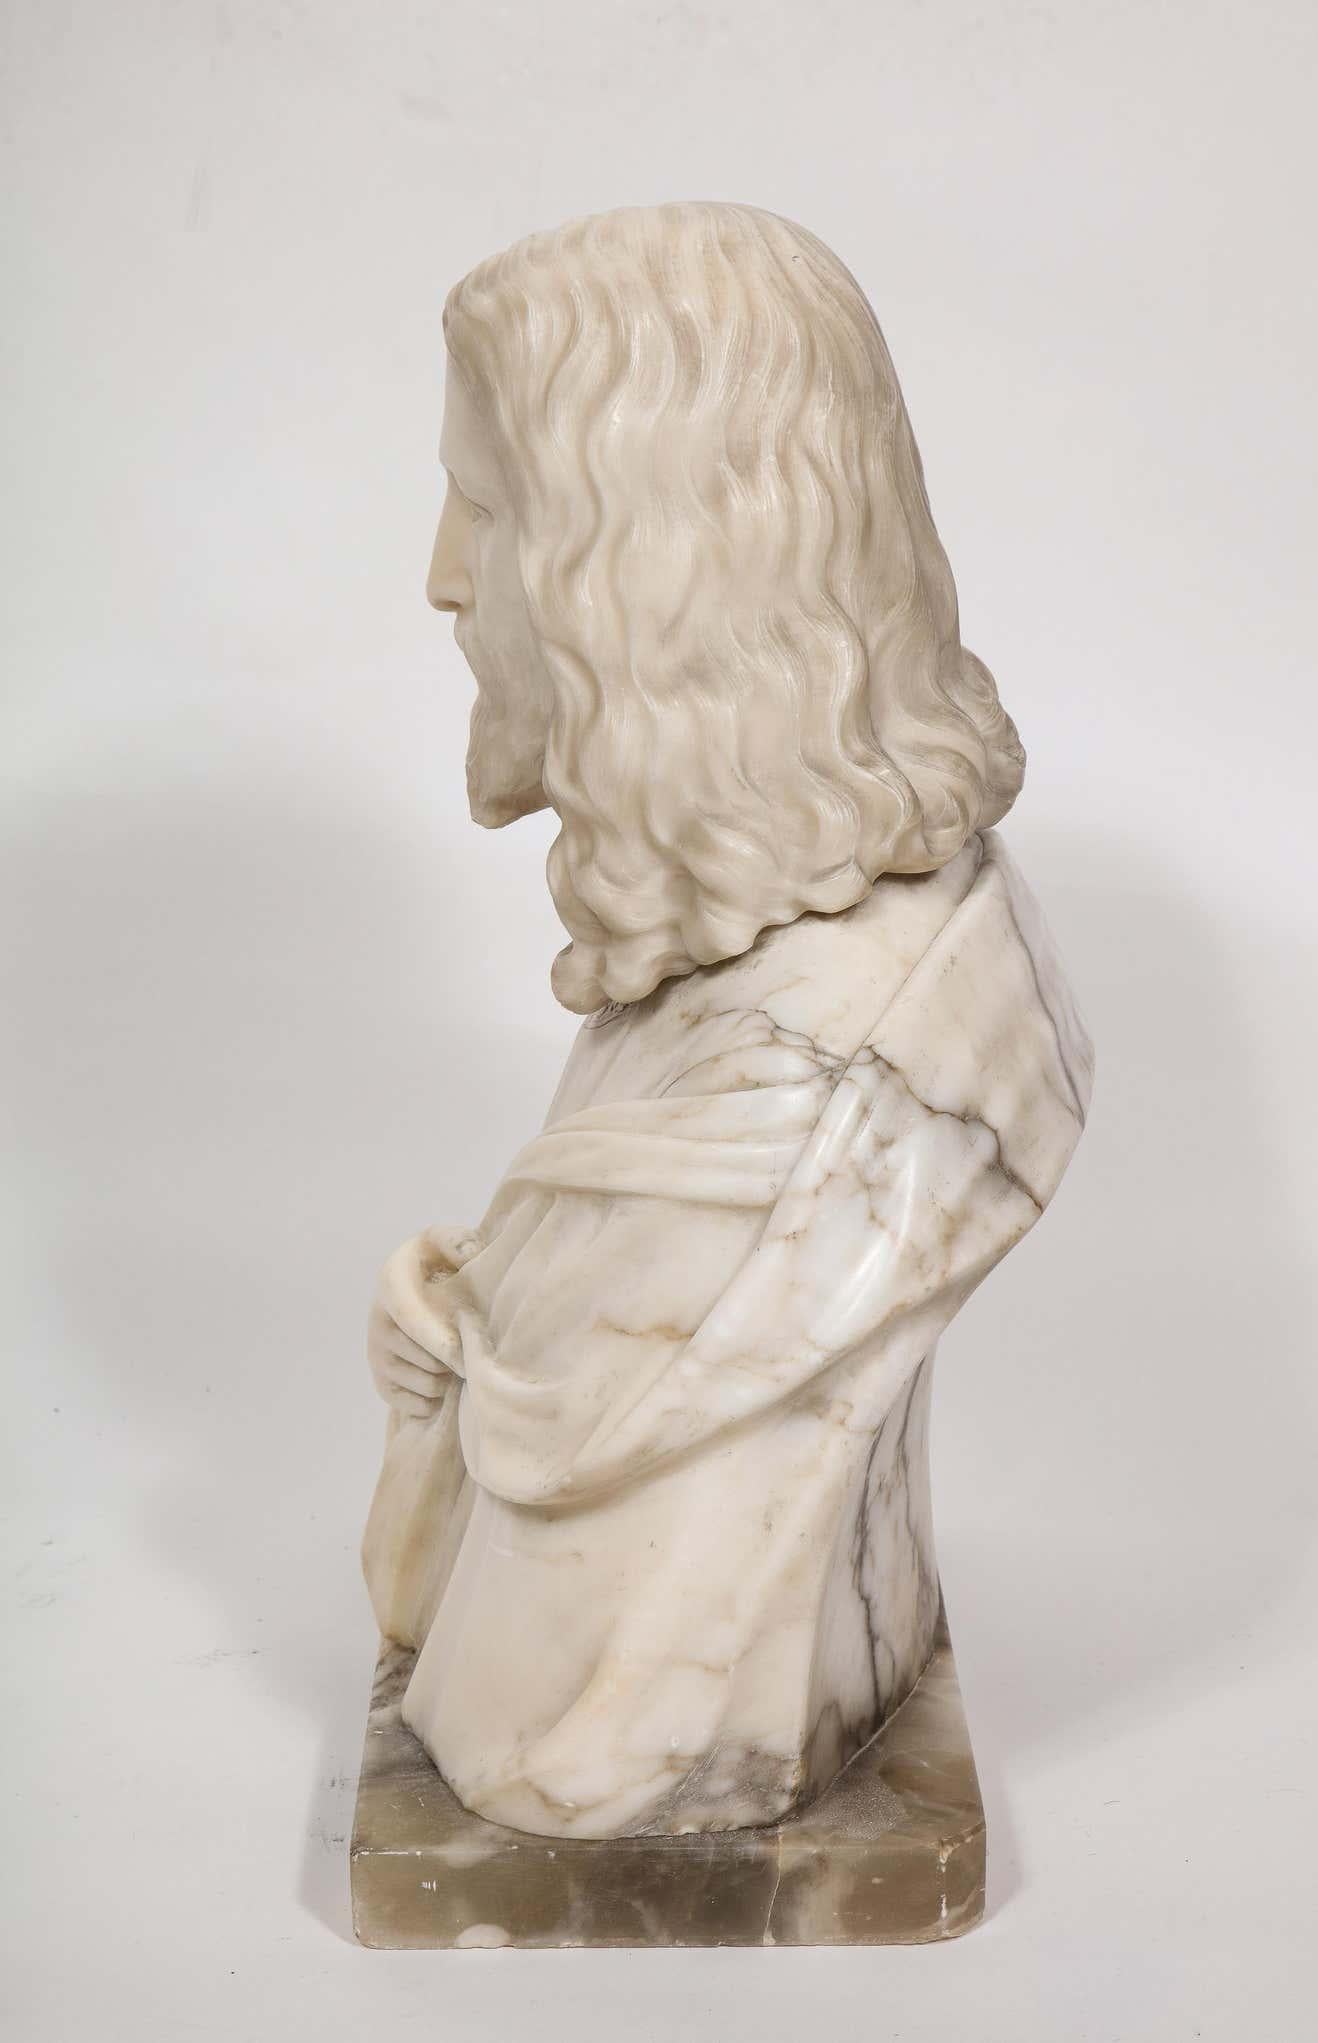 Magnificent 19th Century Italian Alabaster Bust Sculpture of Holy Jesus Christ 3